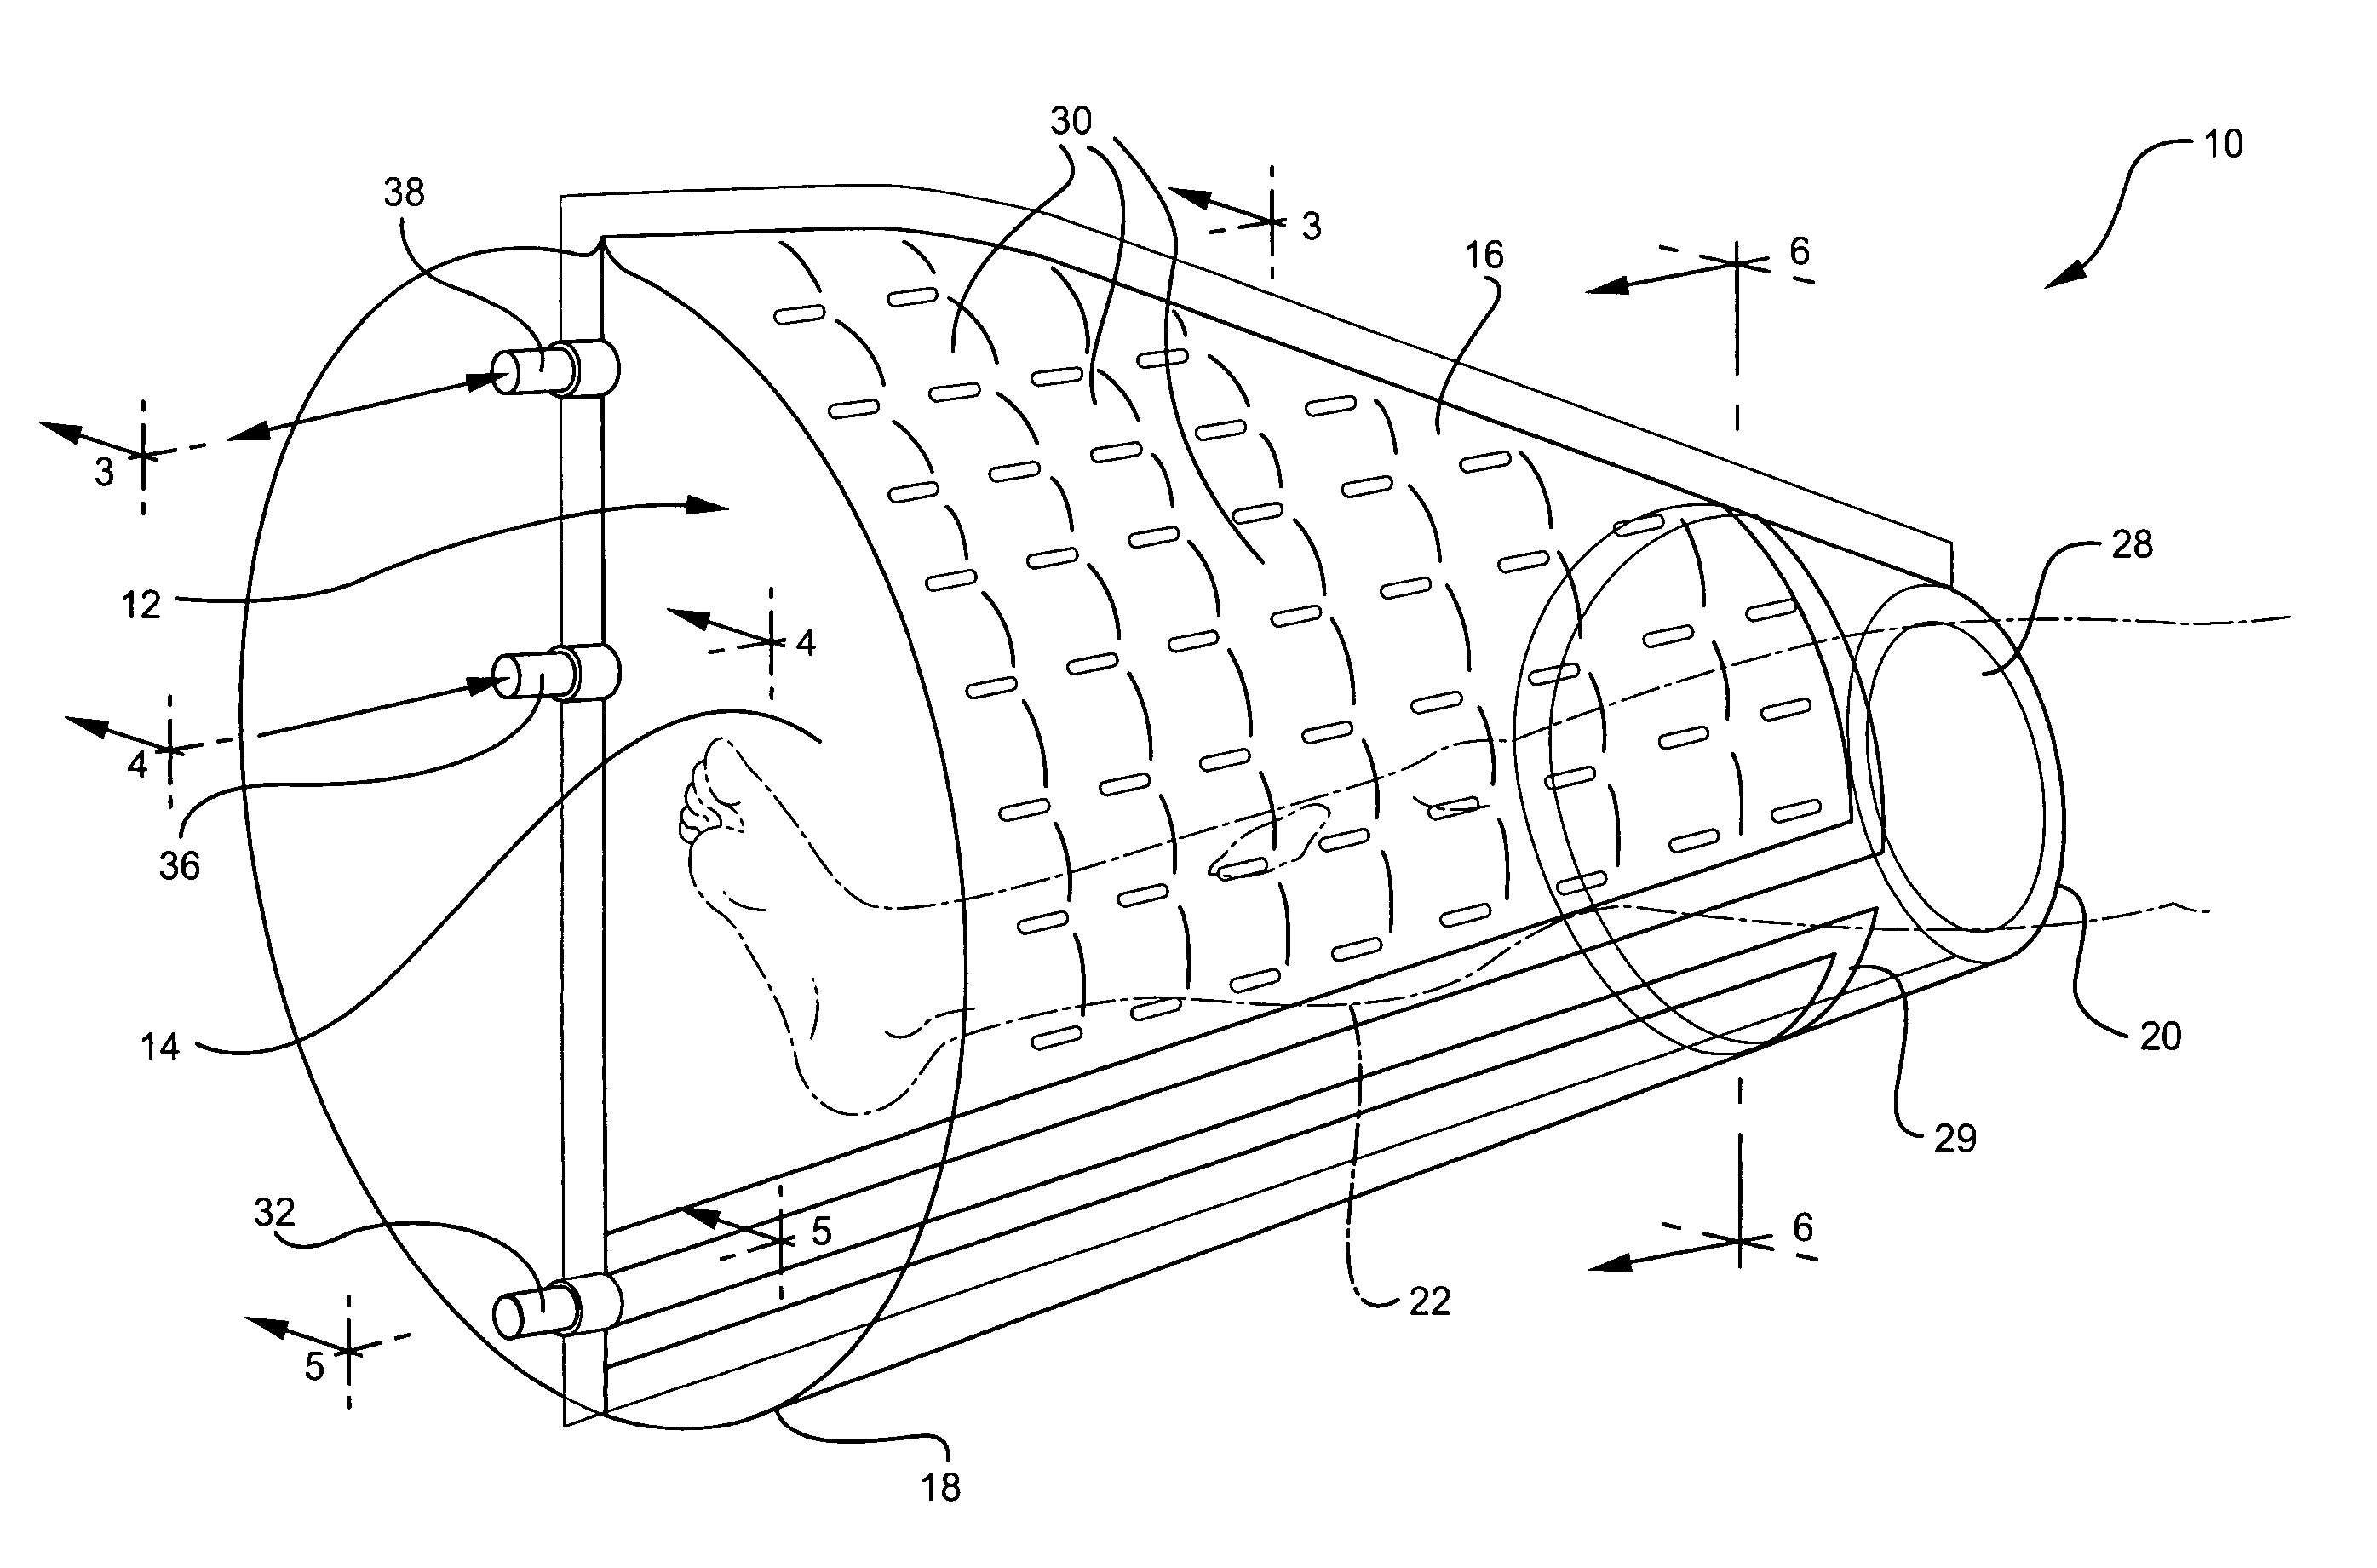 Hyperbaric oxygen devices and delivery methods